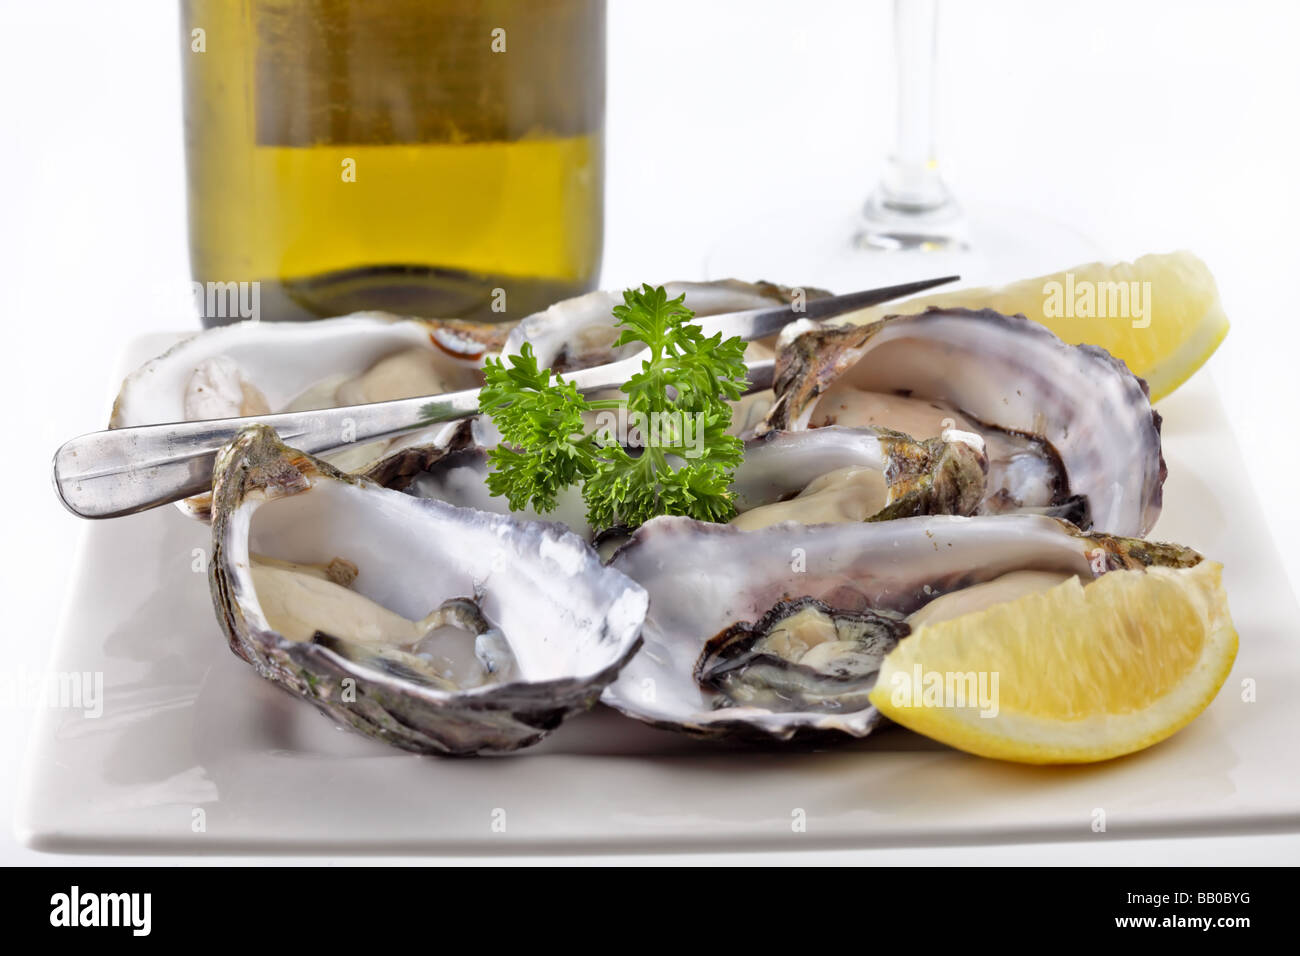 Plate of oyster ready to be eaten with garnish and fork Stock Photo